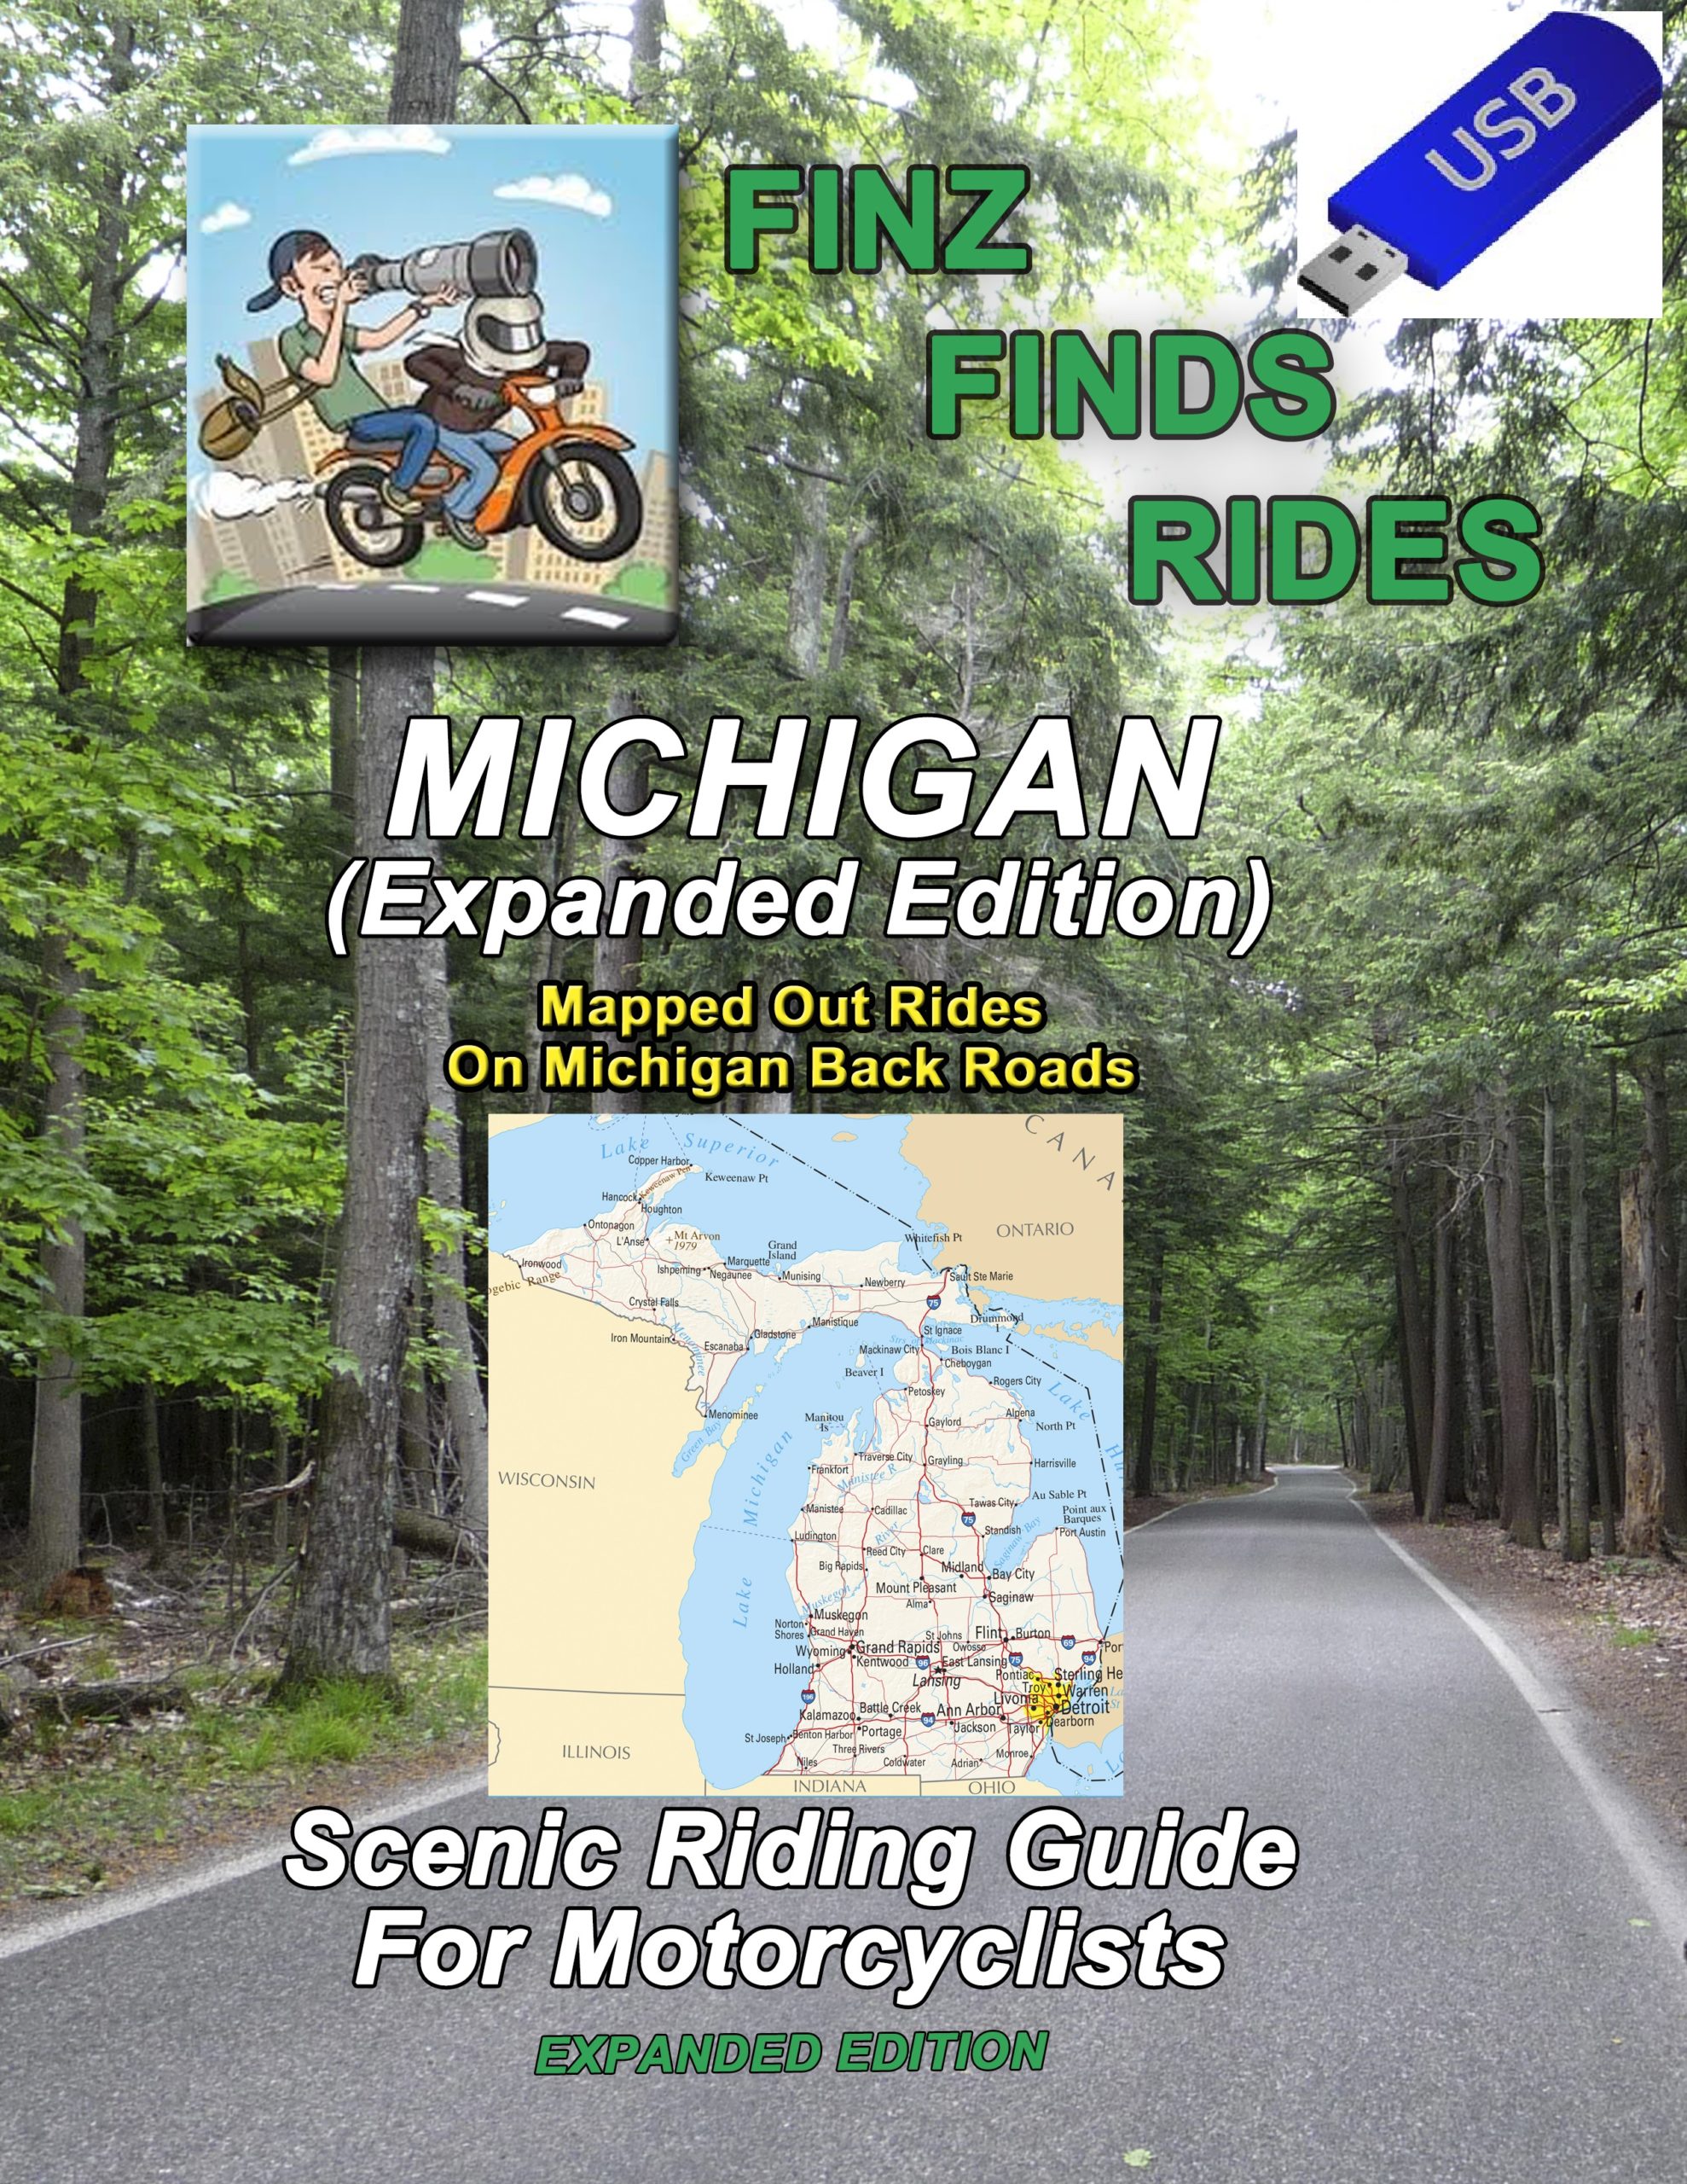 29 scenic back road motorcycle rides in Michigan